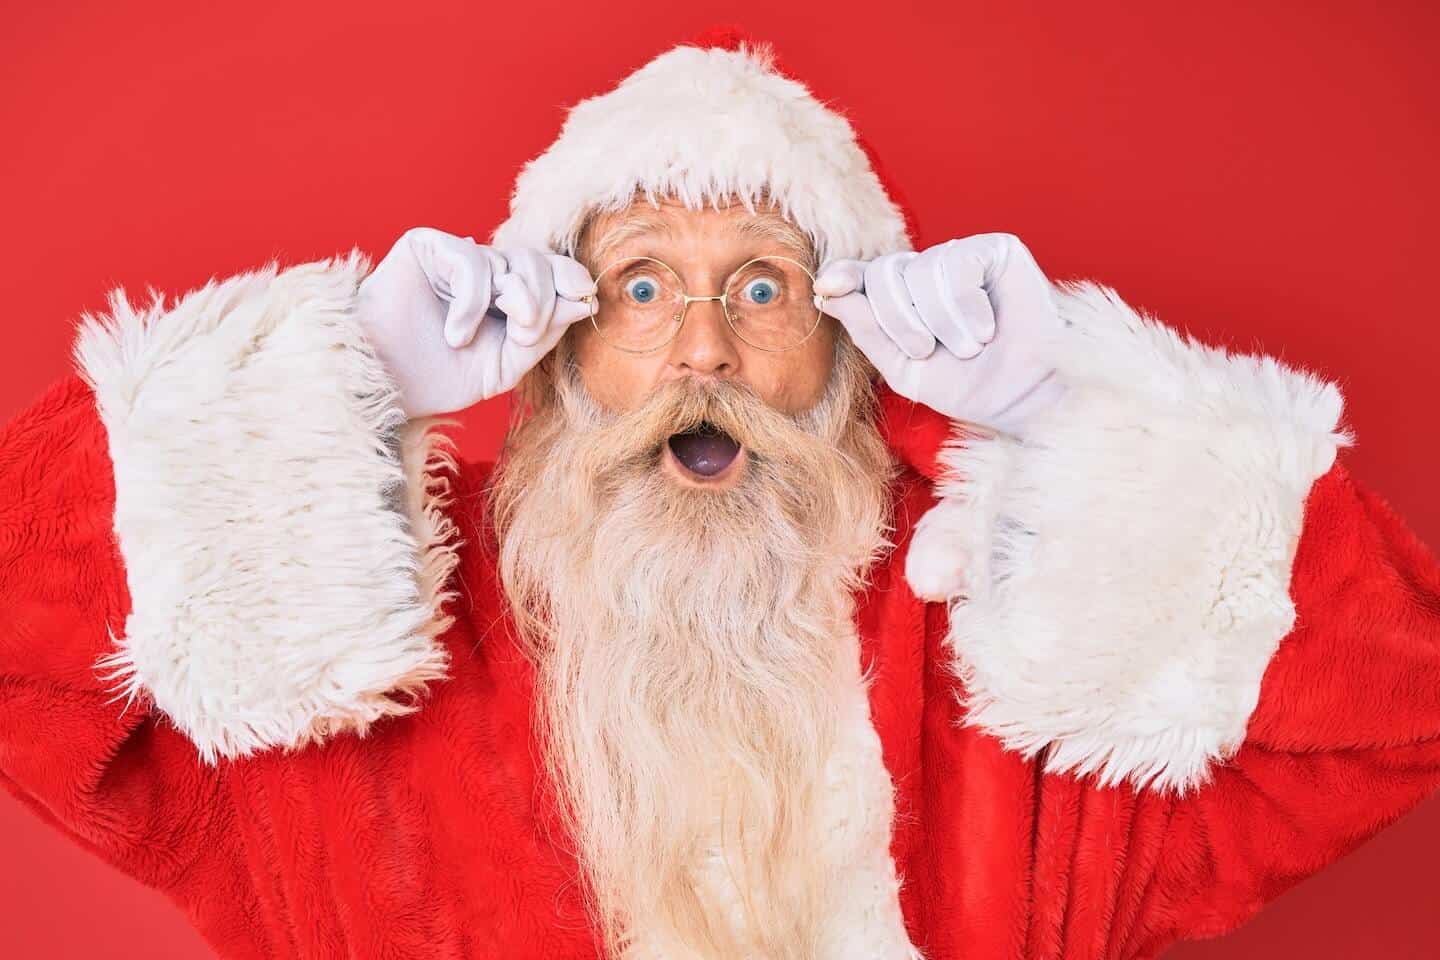 Santa Claus holding onto the sides of his glasses with both hands, and an open mouth looking surprised.